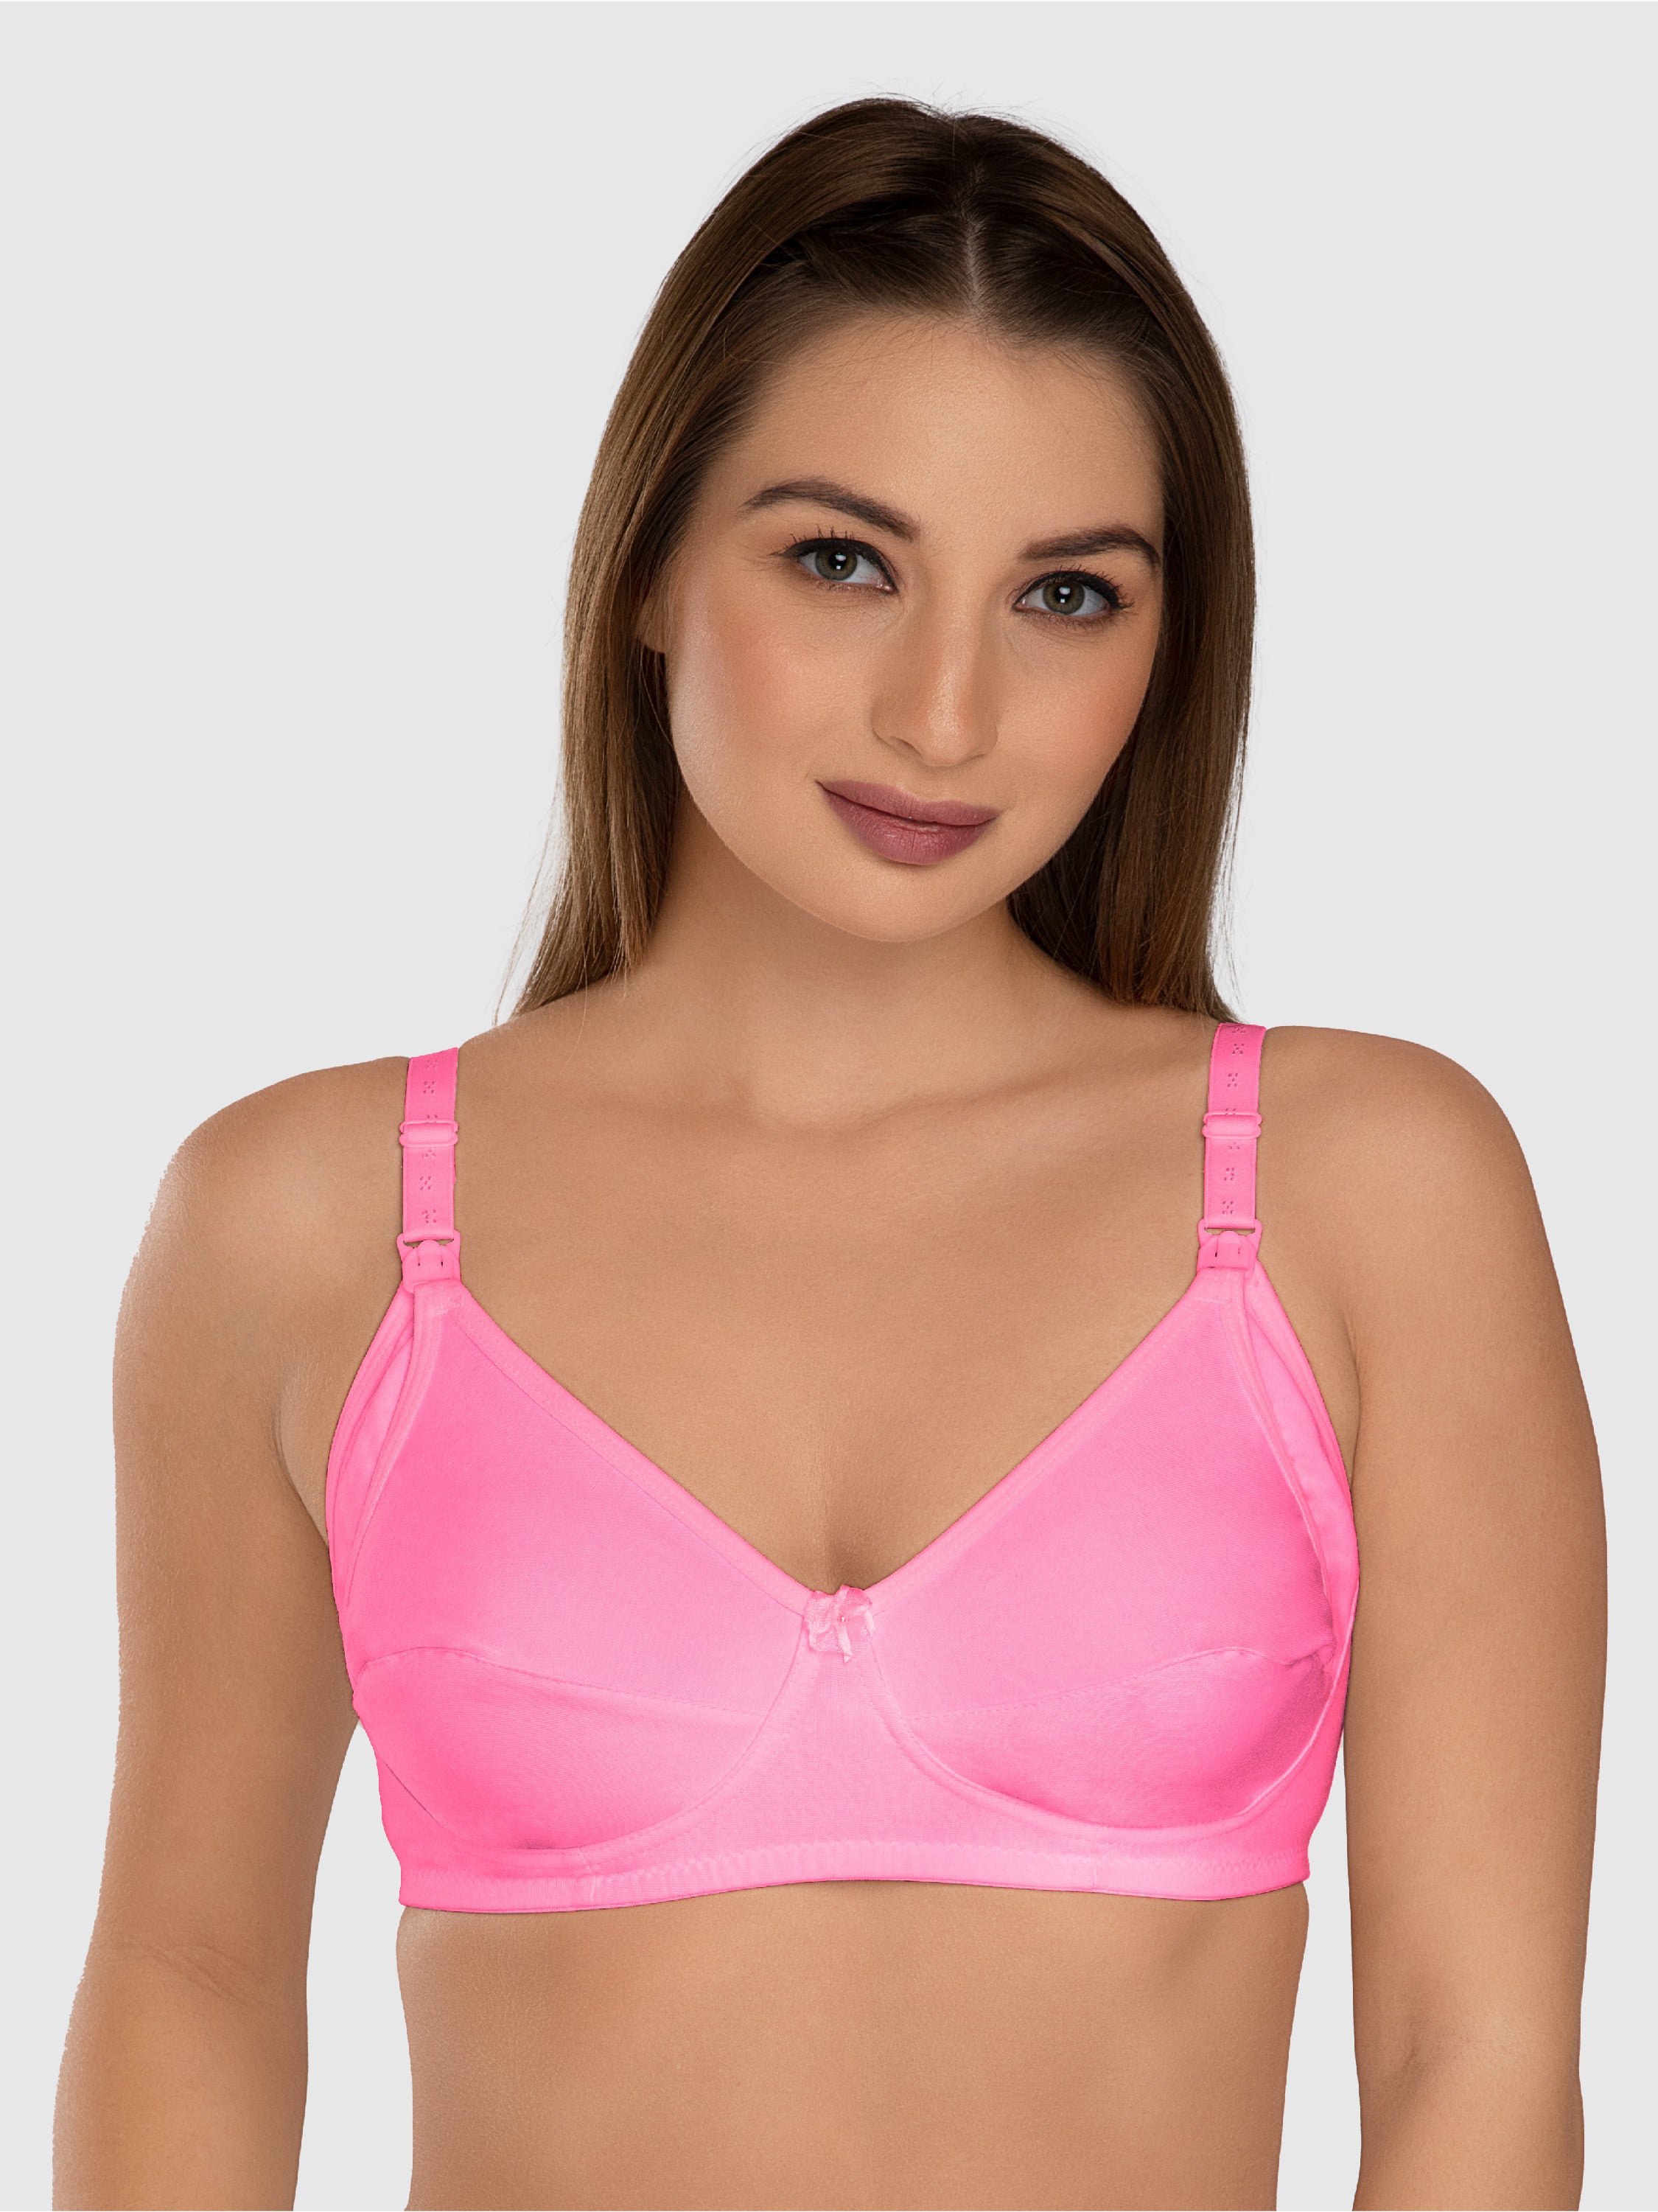 Daisy Dee Light Pink Non Padded Non Wired Full Coverage Maternity Bra -DAINTY-Light Pink